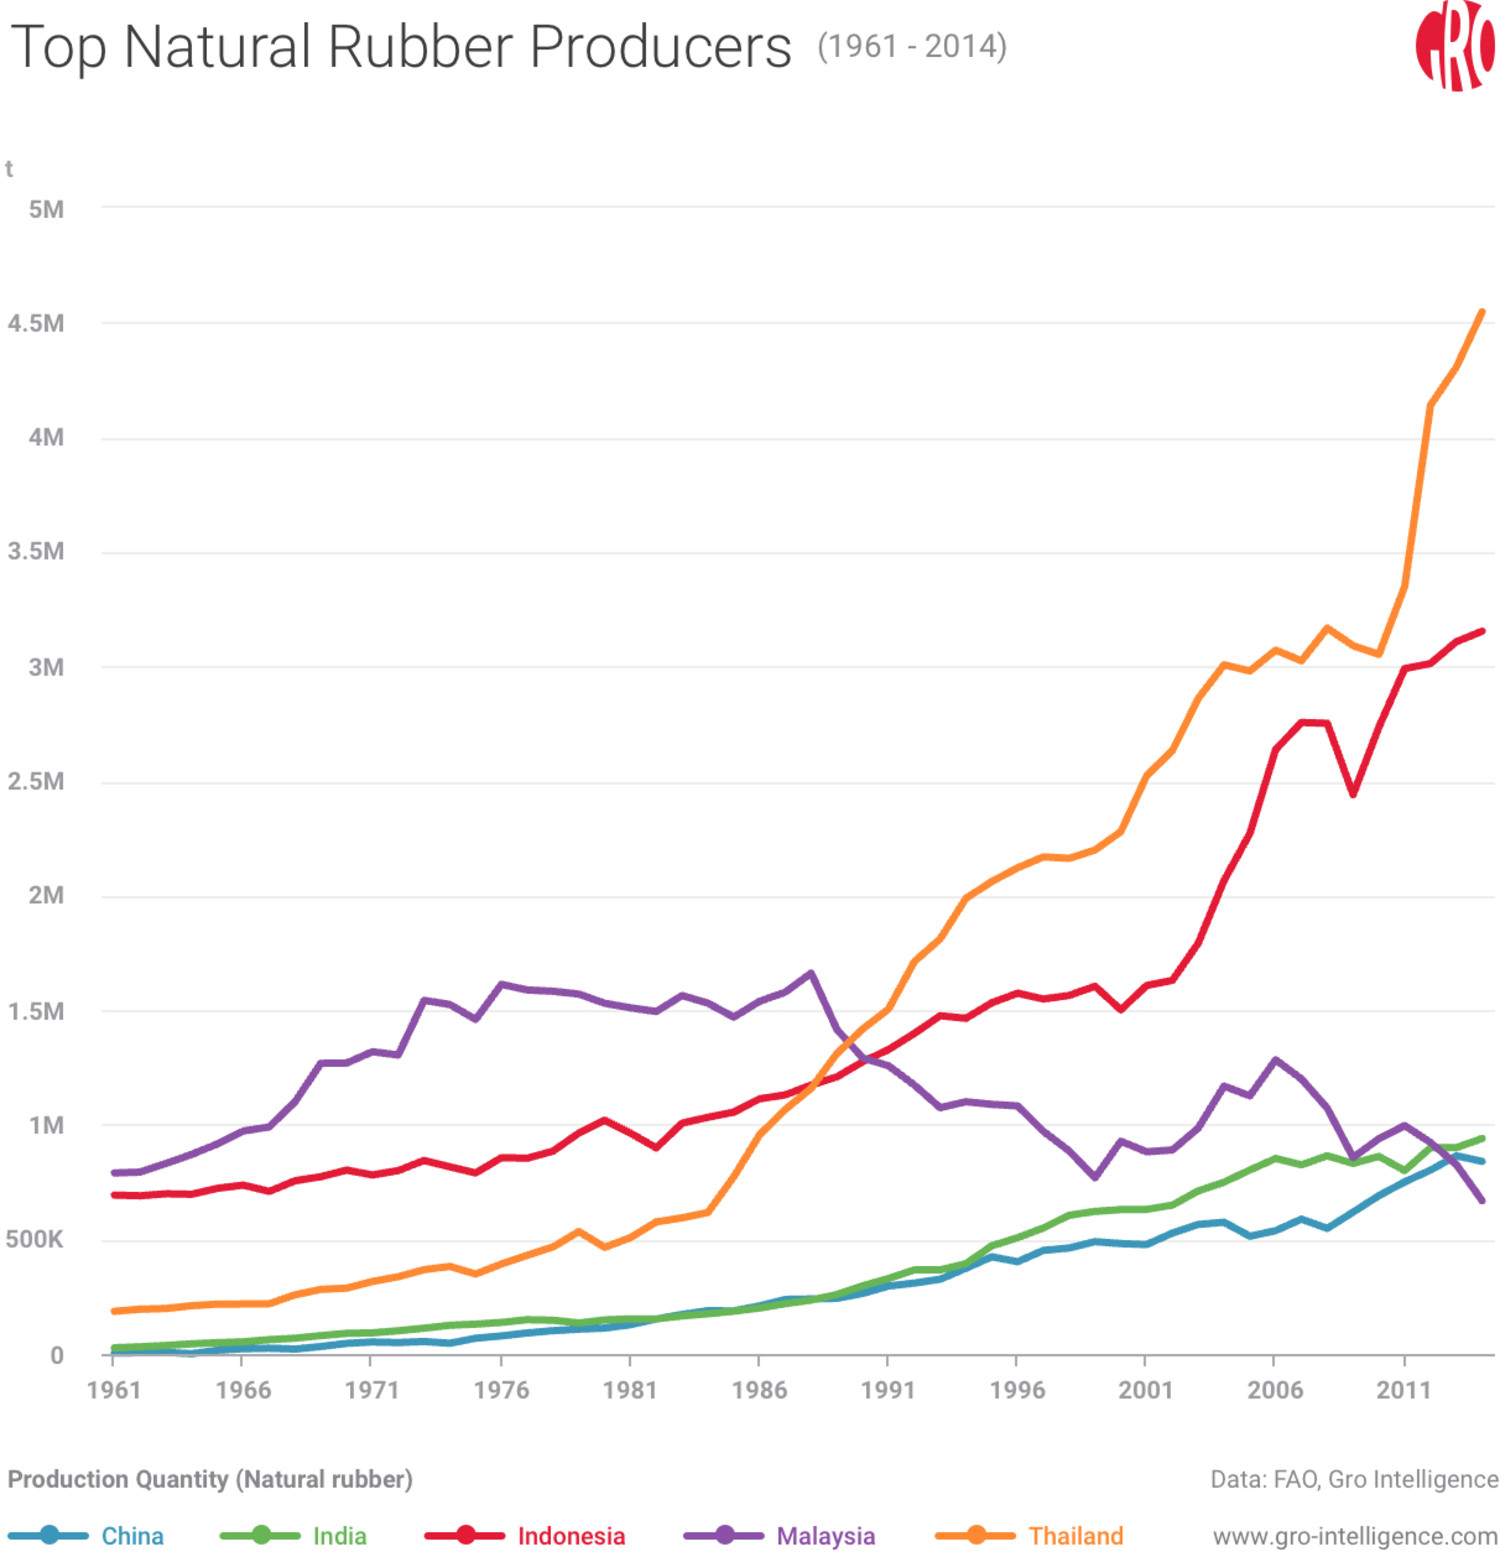 Top Natural Rubber Producers